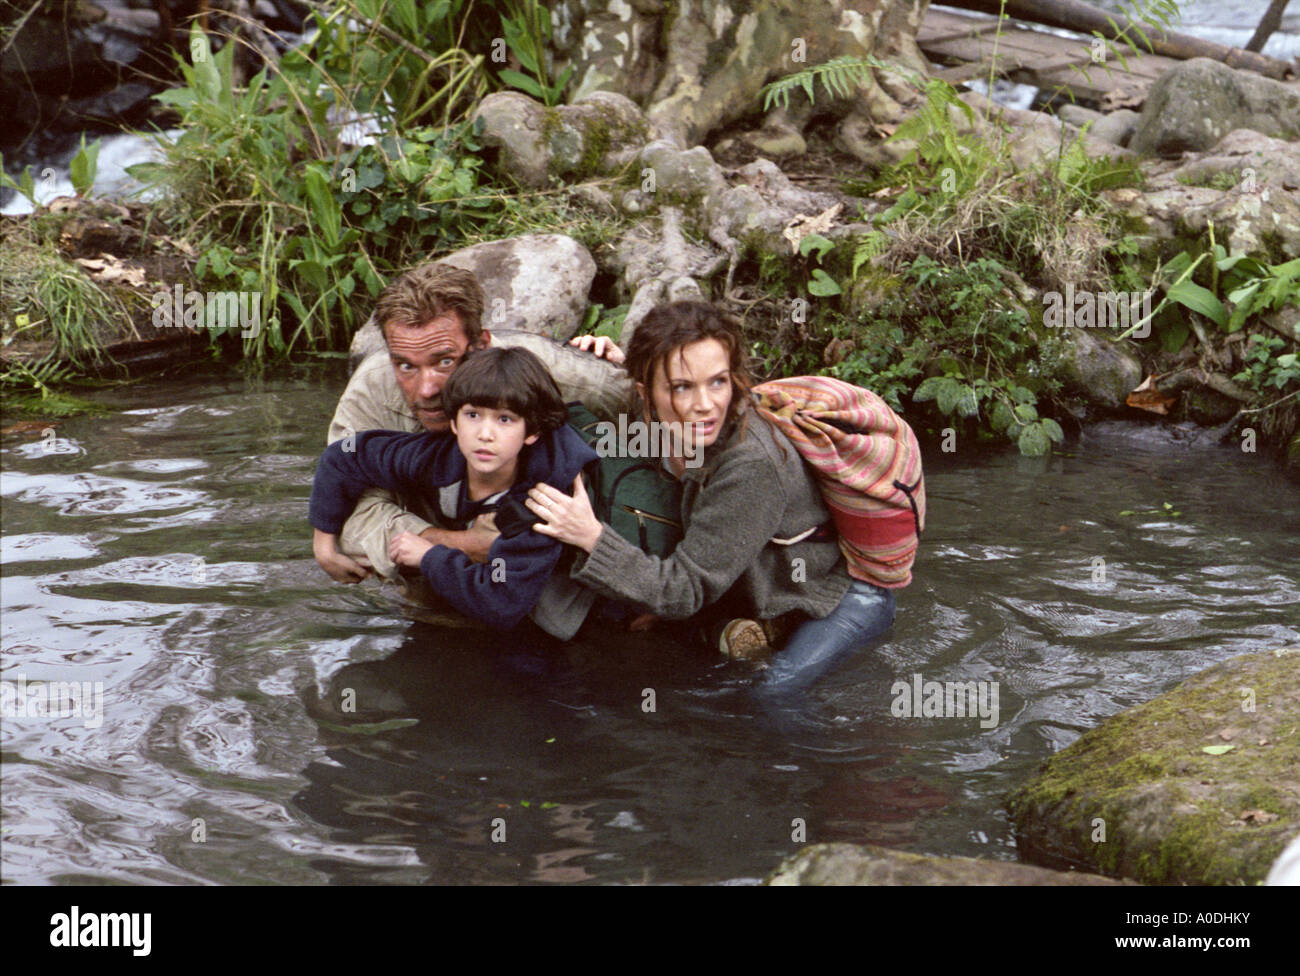 COLLATERAL DAMAGE 2002 Warner film with Arnold Schwarzenegger and Francesca Neri Stock Photo